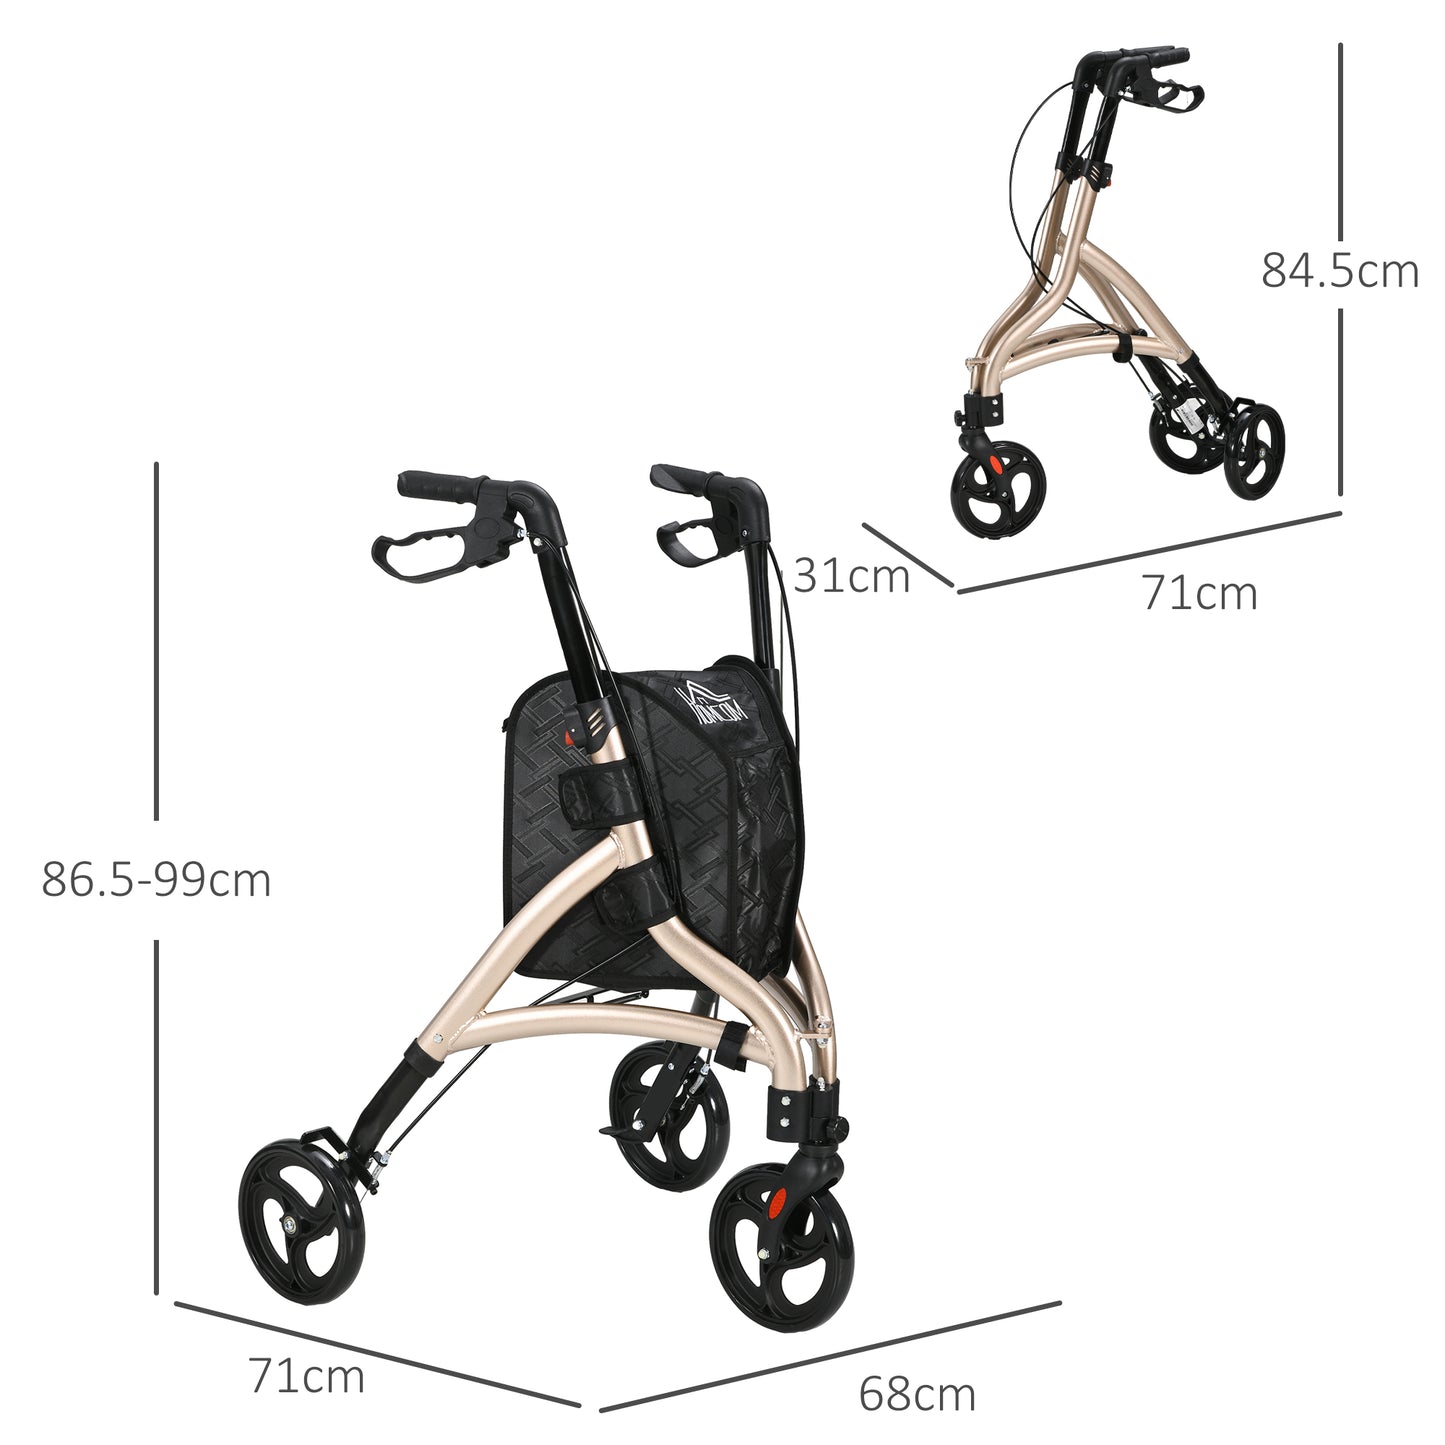 HOMCOM 3 Wheel Rollator, Lightweight Aluminium Tri Walker with Adjustable Handle, Storage Bag and Dual Brakes, Folding Mobility Walking Aid for Elderly, Handicapped, 5.3kg, Gold Tone